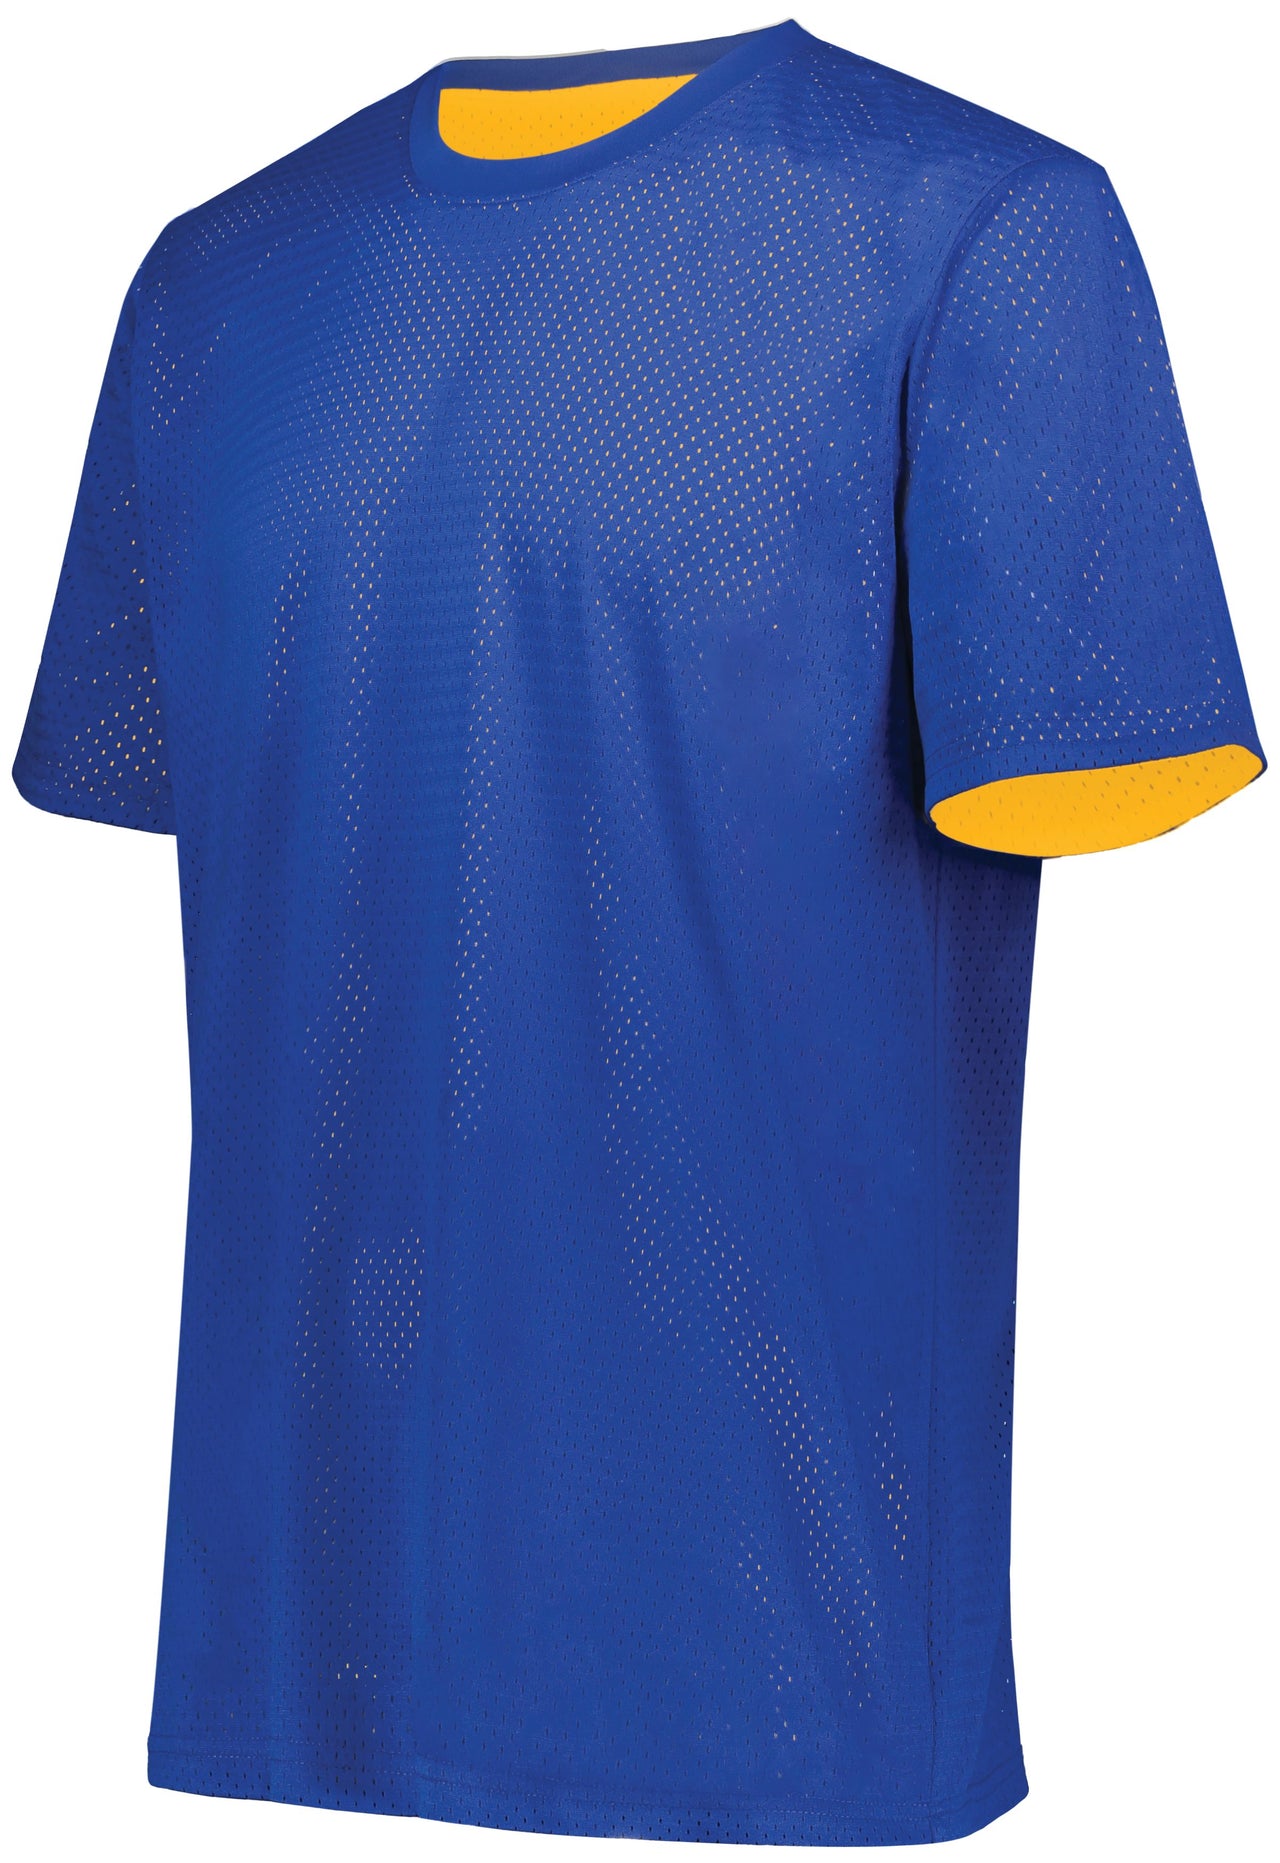 Youth Short Sleeve Mesh Reversible Jersey - 1603